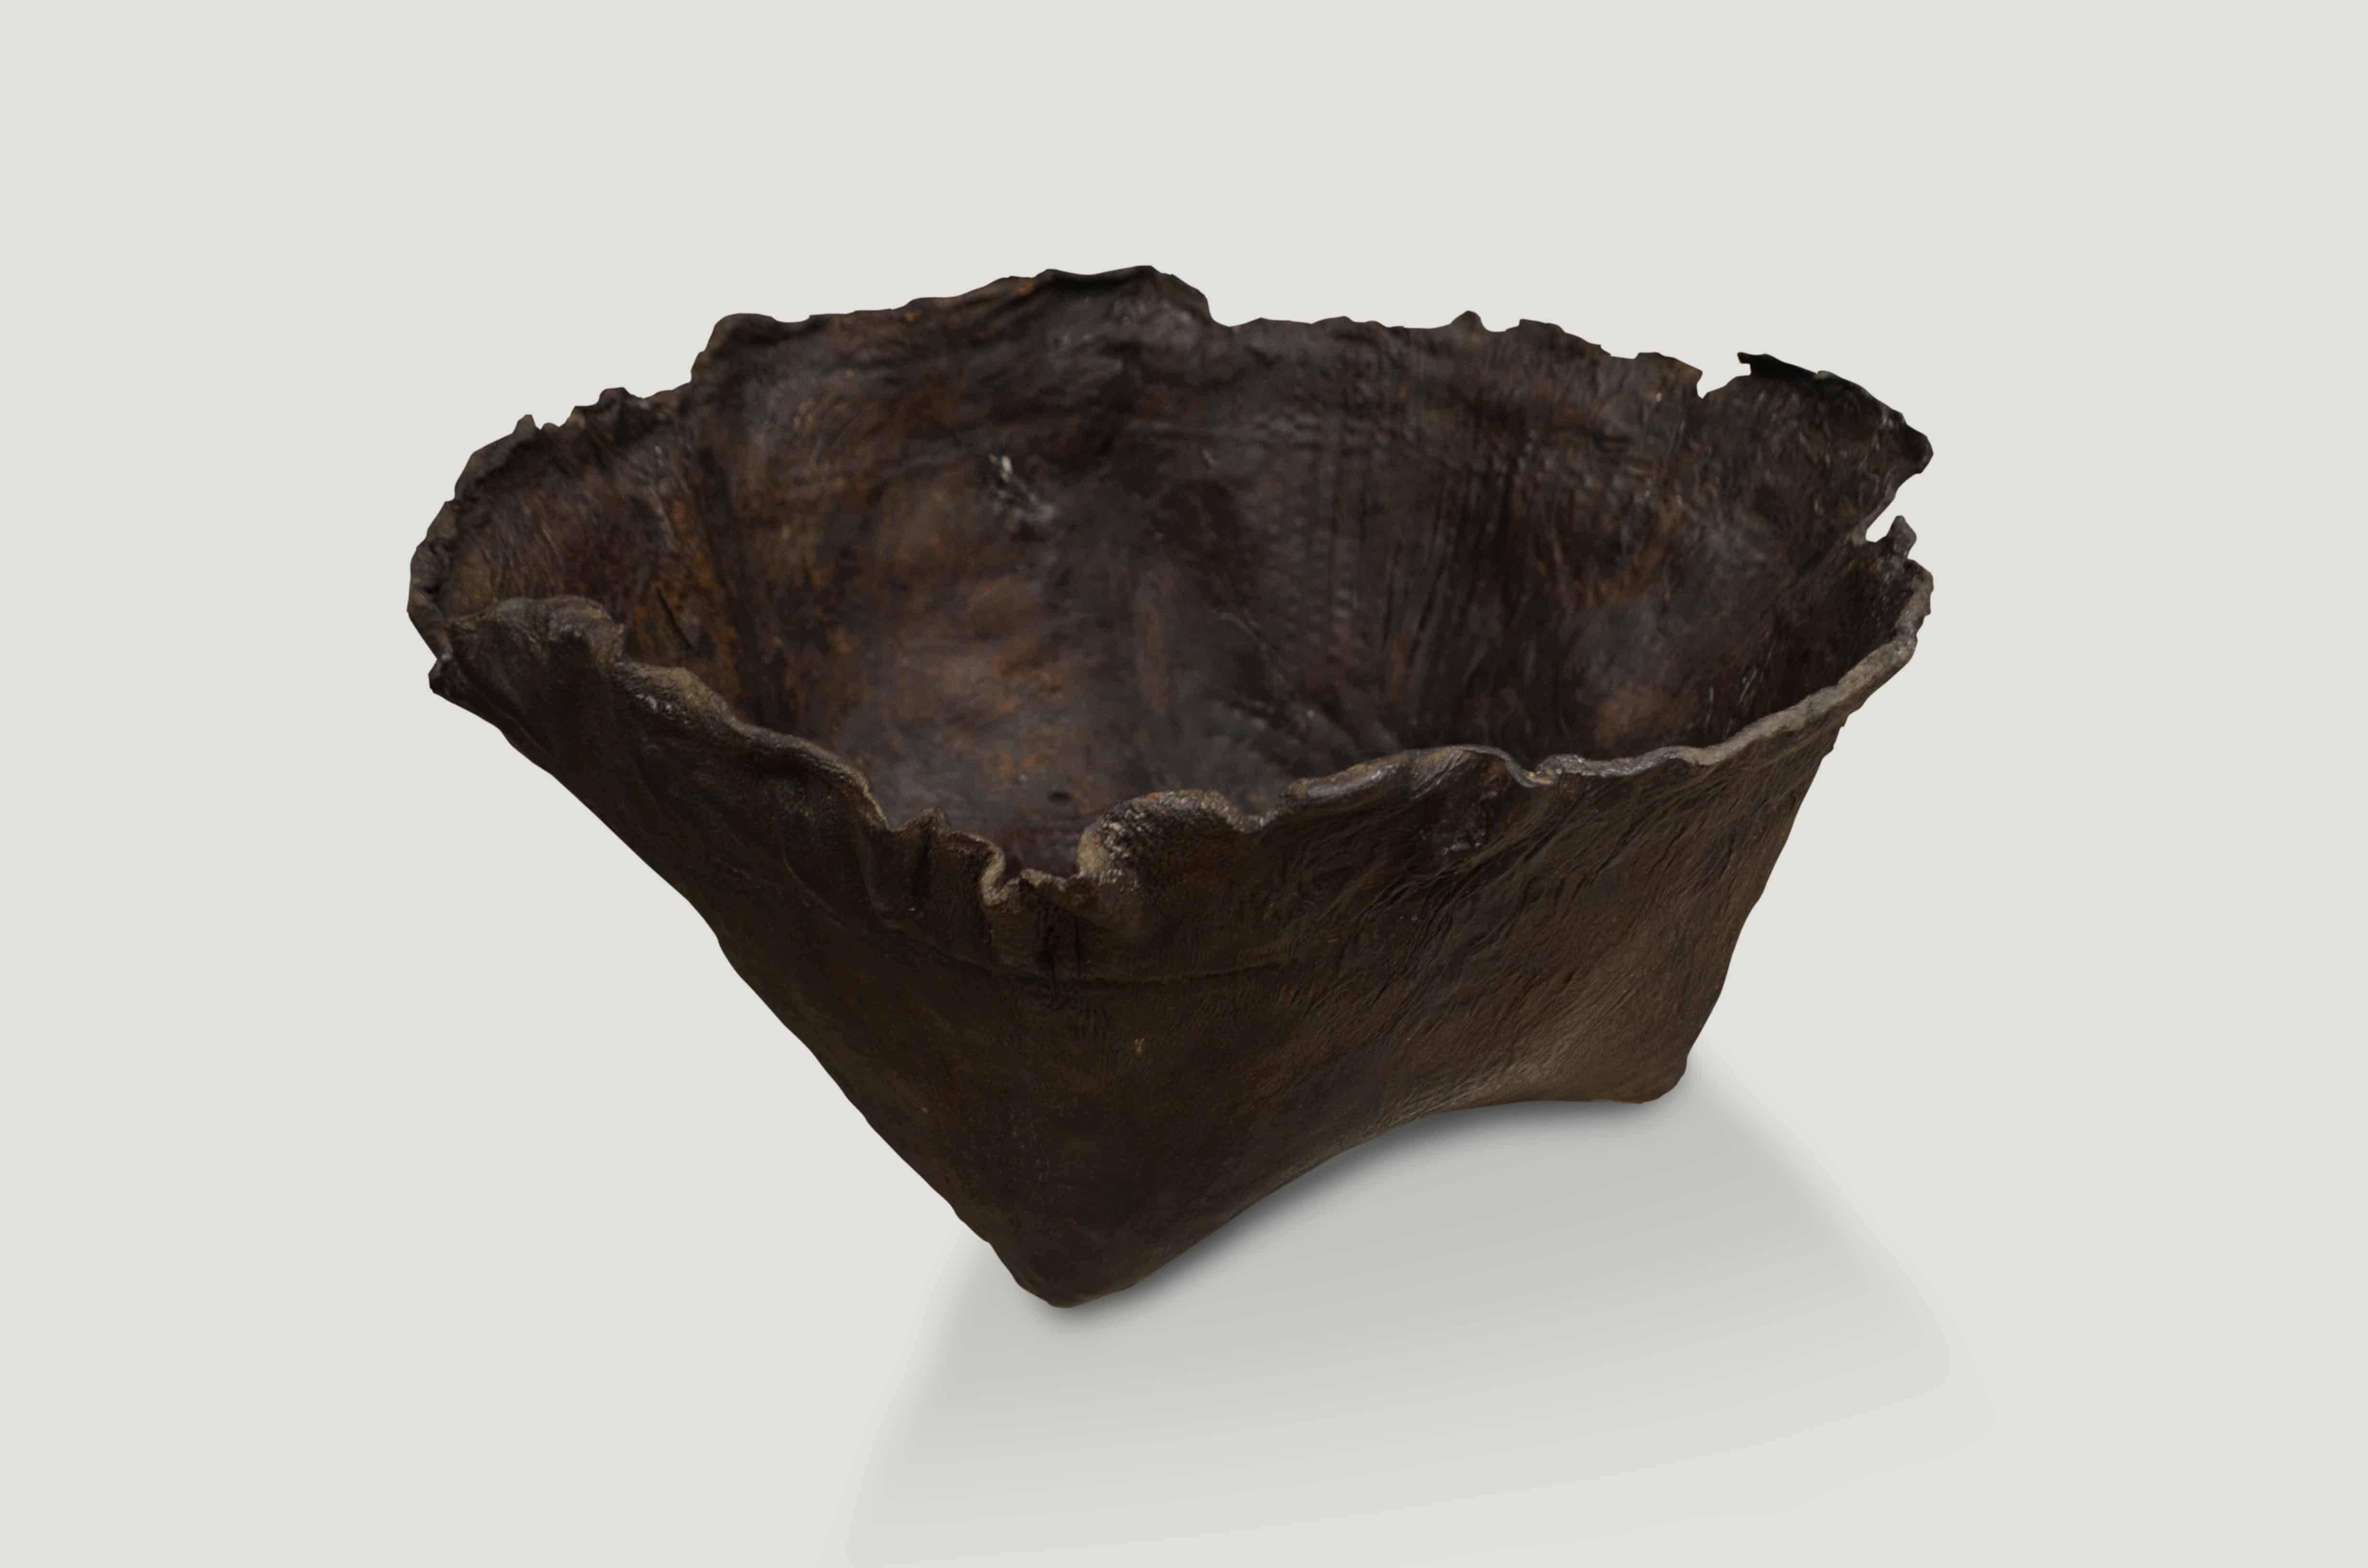 Antique container from Borneo made from aged buffalo hide and formed to produce a bowl. Beautiful espresso patina and natural organic rim. Great for holding magazines, towels, firewood, etc. We have a collection. All unique.

This container was